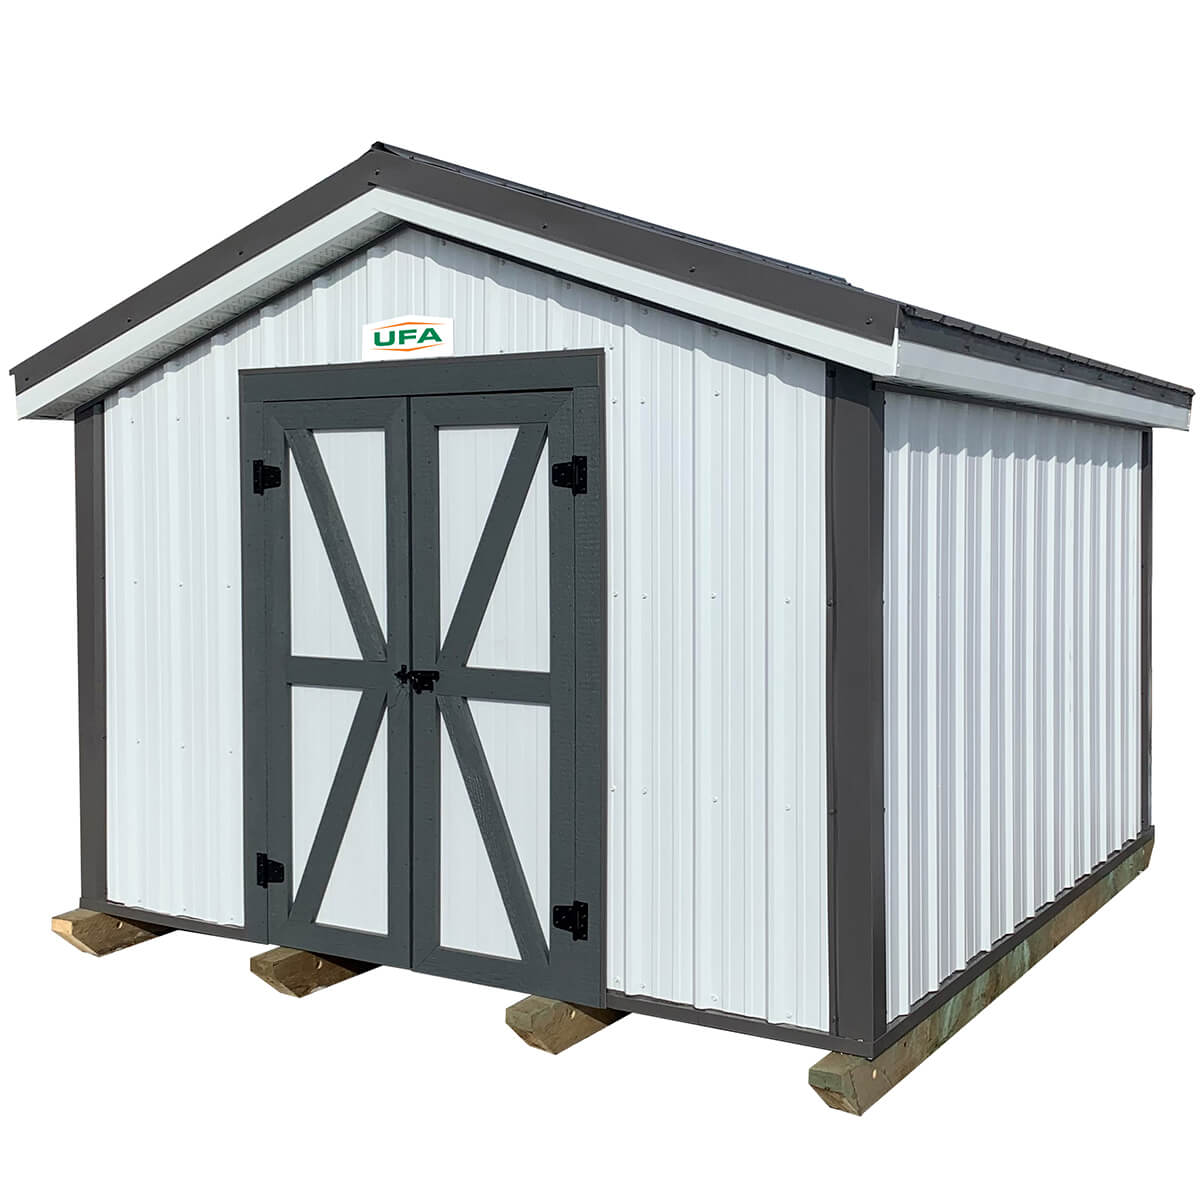 Cladded Gable Shed - 10 ft x 10 ft x 6 ft